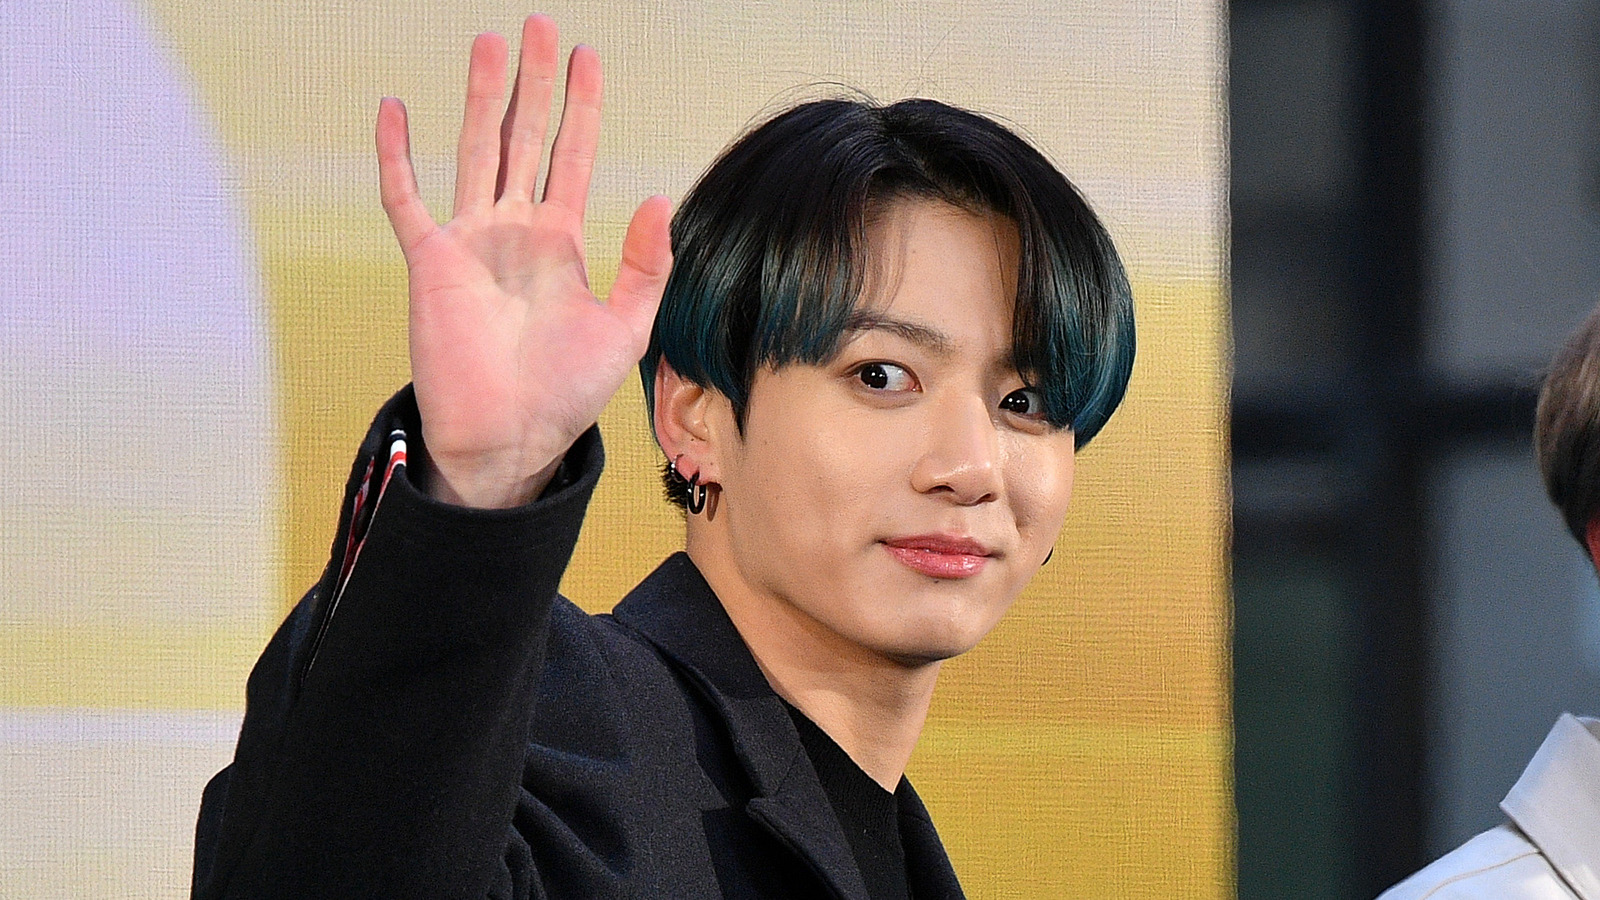 BTS' Jungkook Reveals A Brand-New Look That's Turning Heads